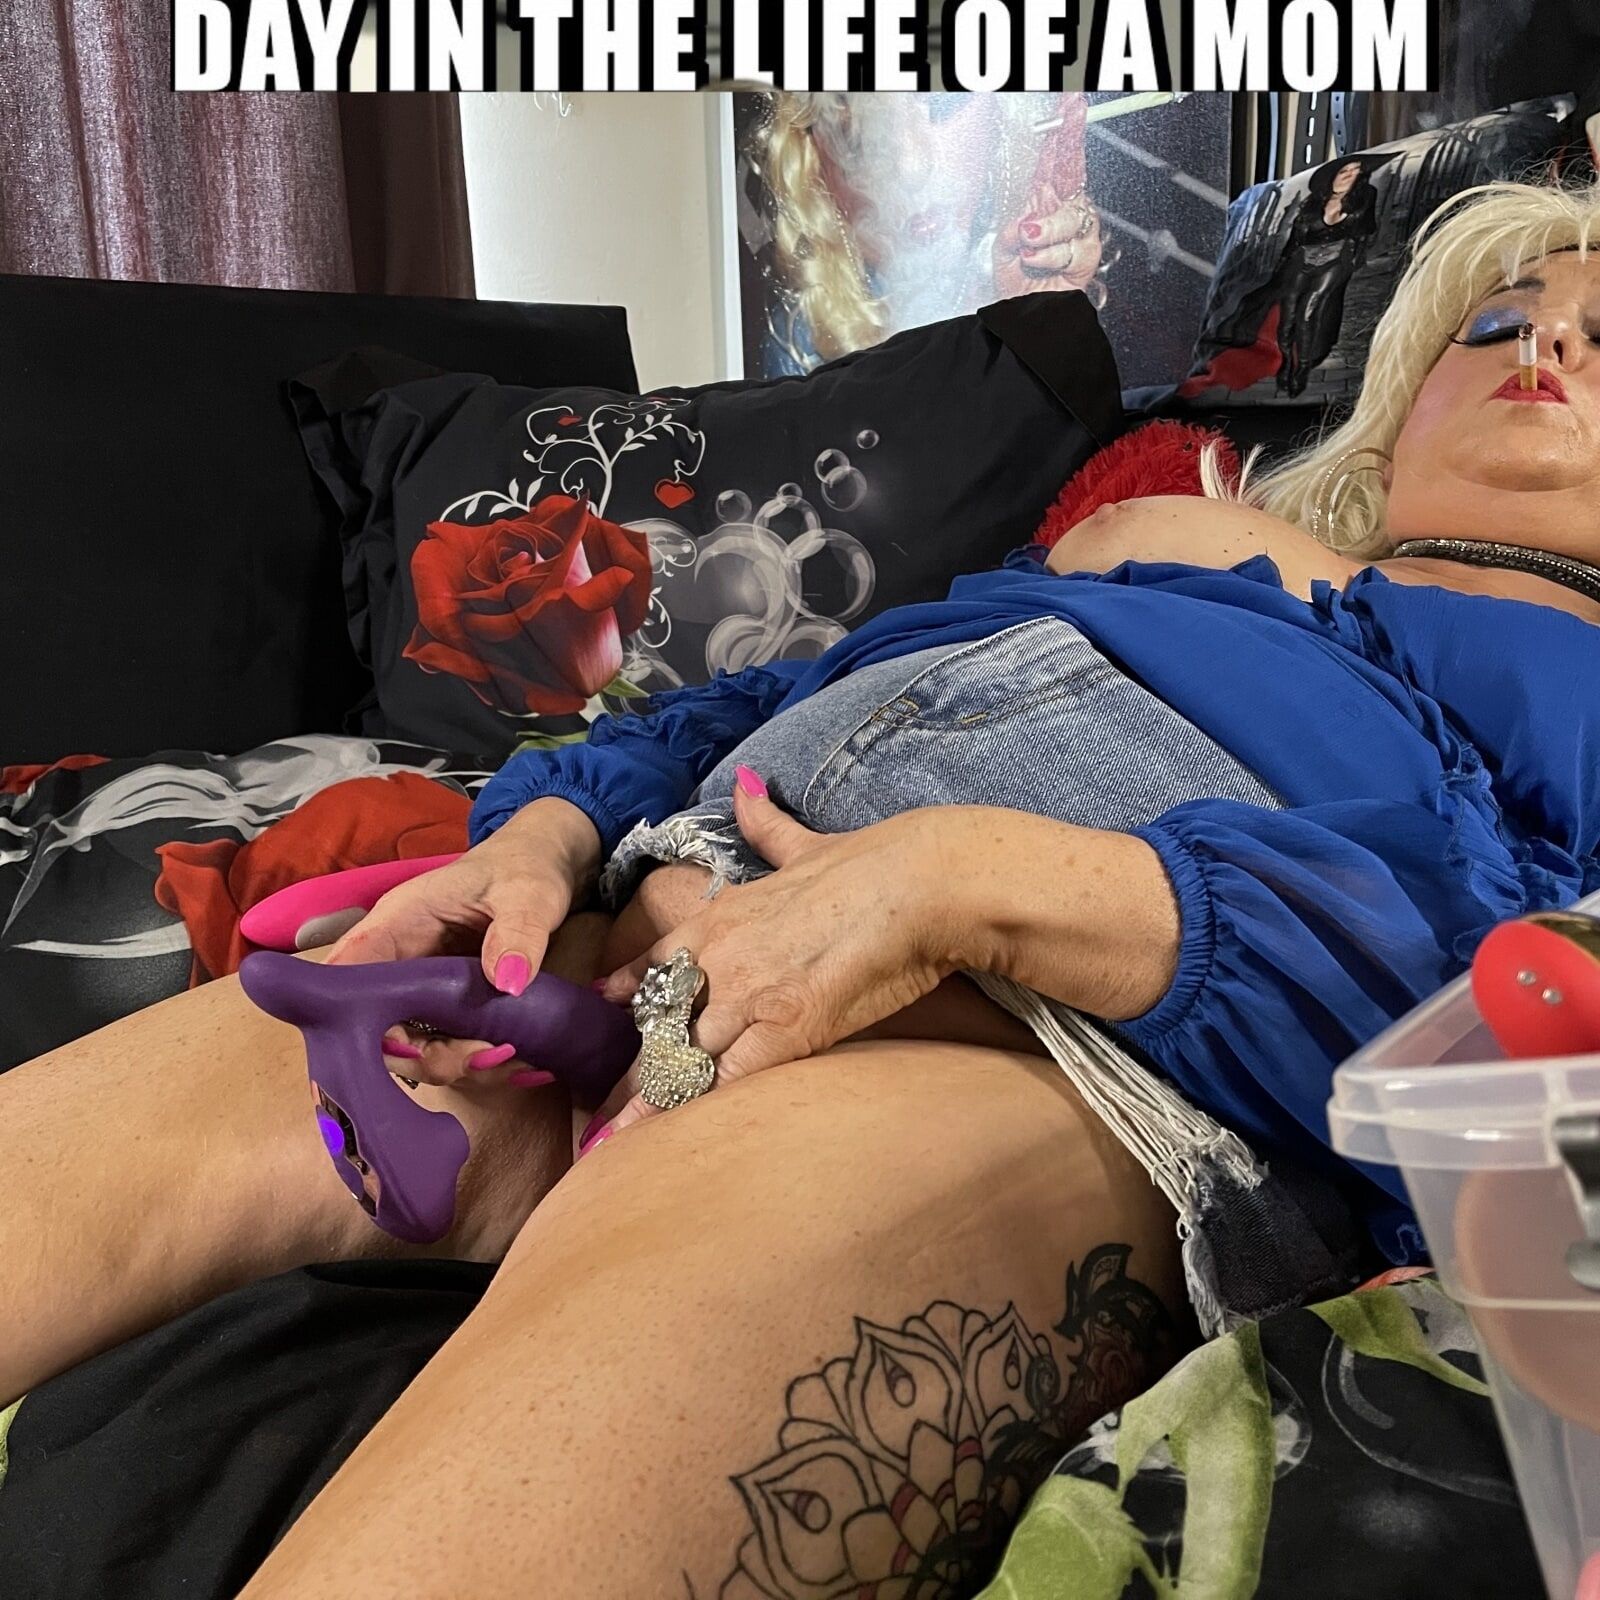 SHIRLEY THE LIFE OF A MOM #47